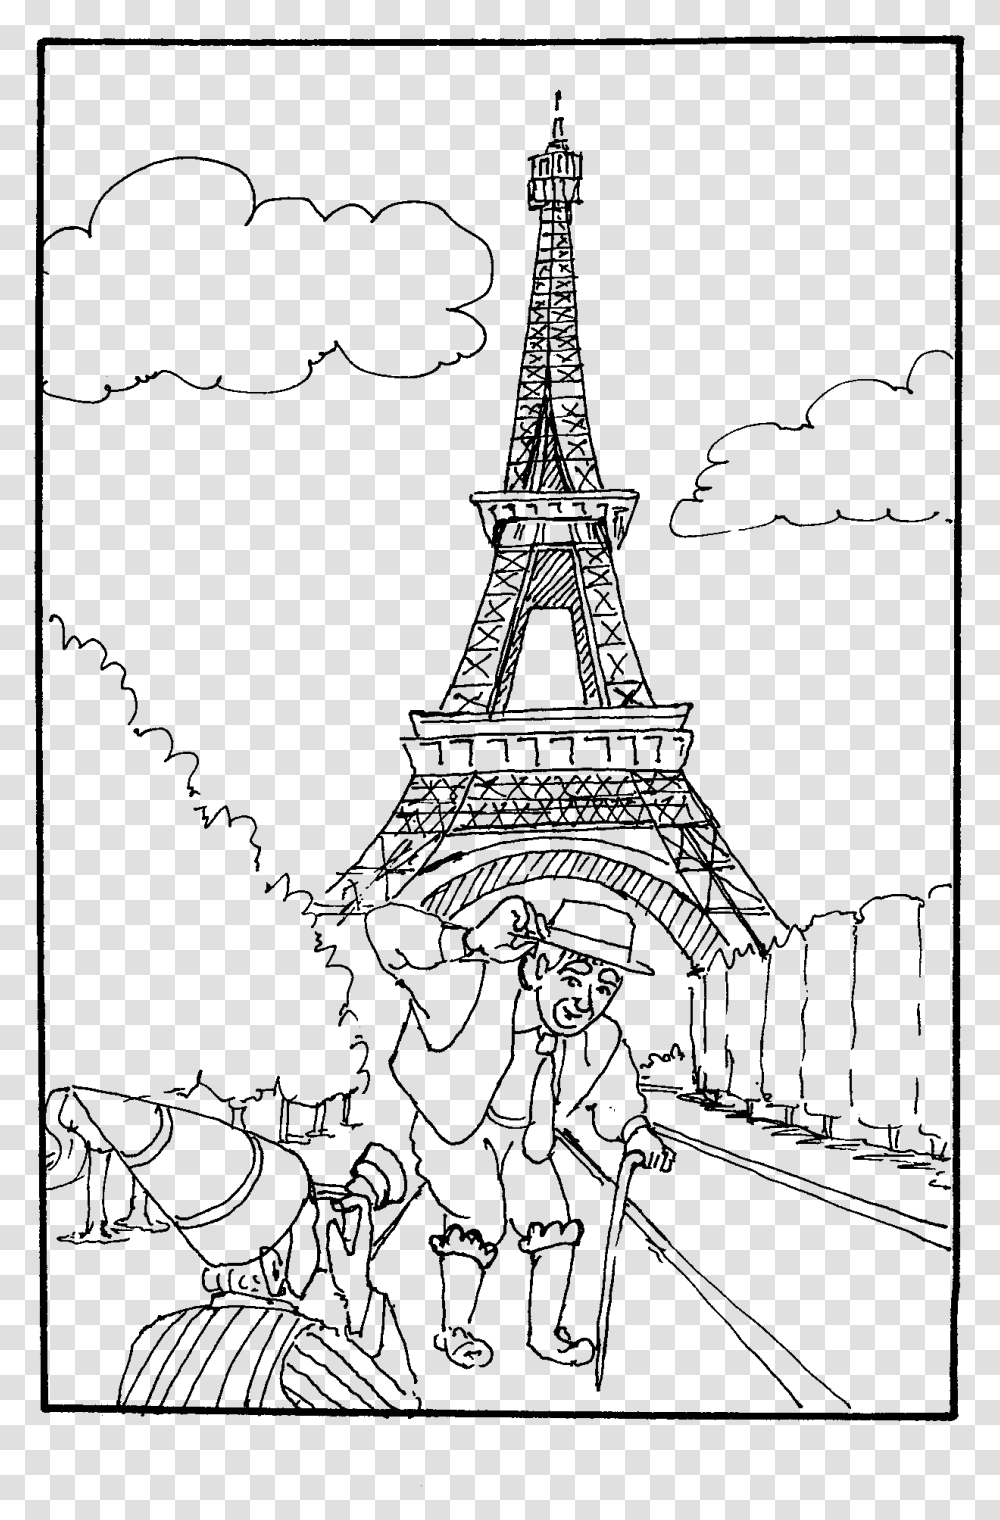 Eiffel Tower Silhouette Image French Art Coloring Pages, Spire, Architecture, Building, Steeple Transparent Png